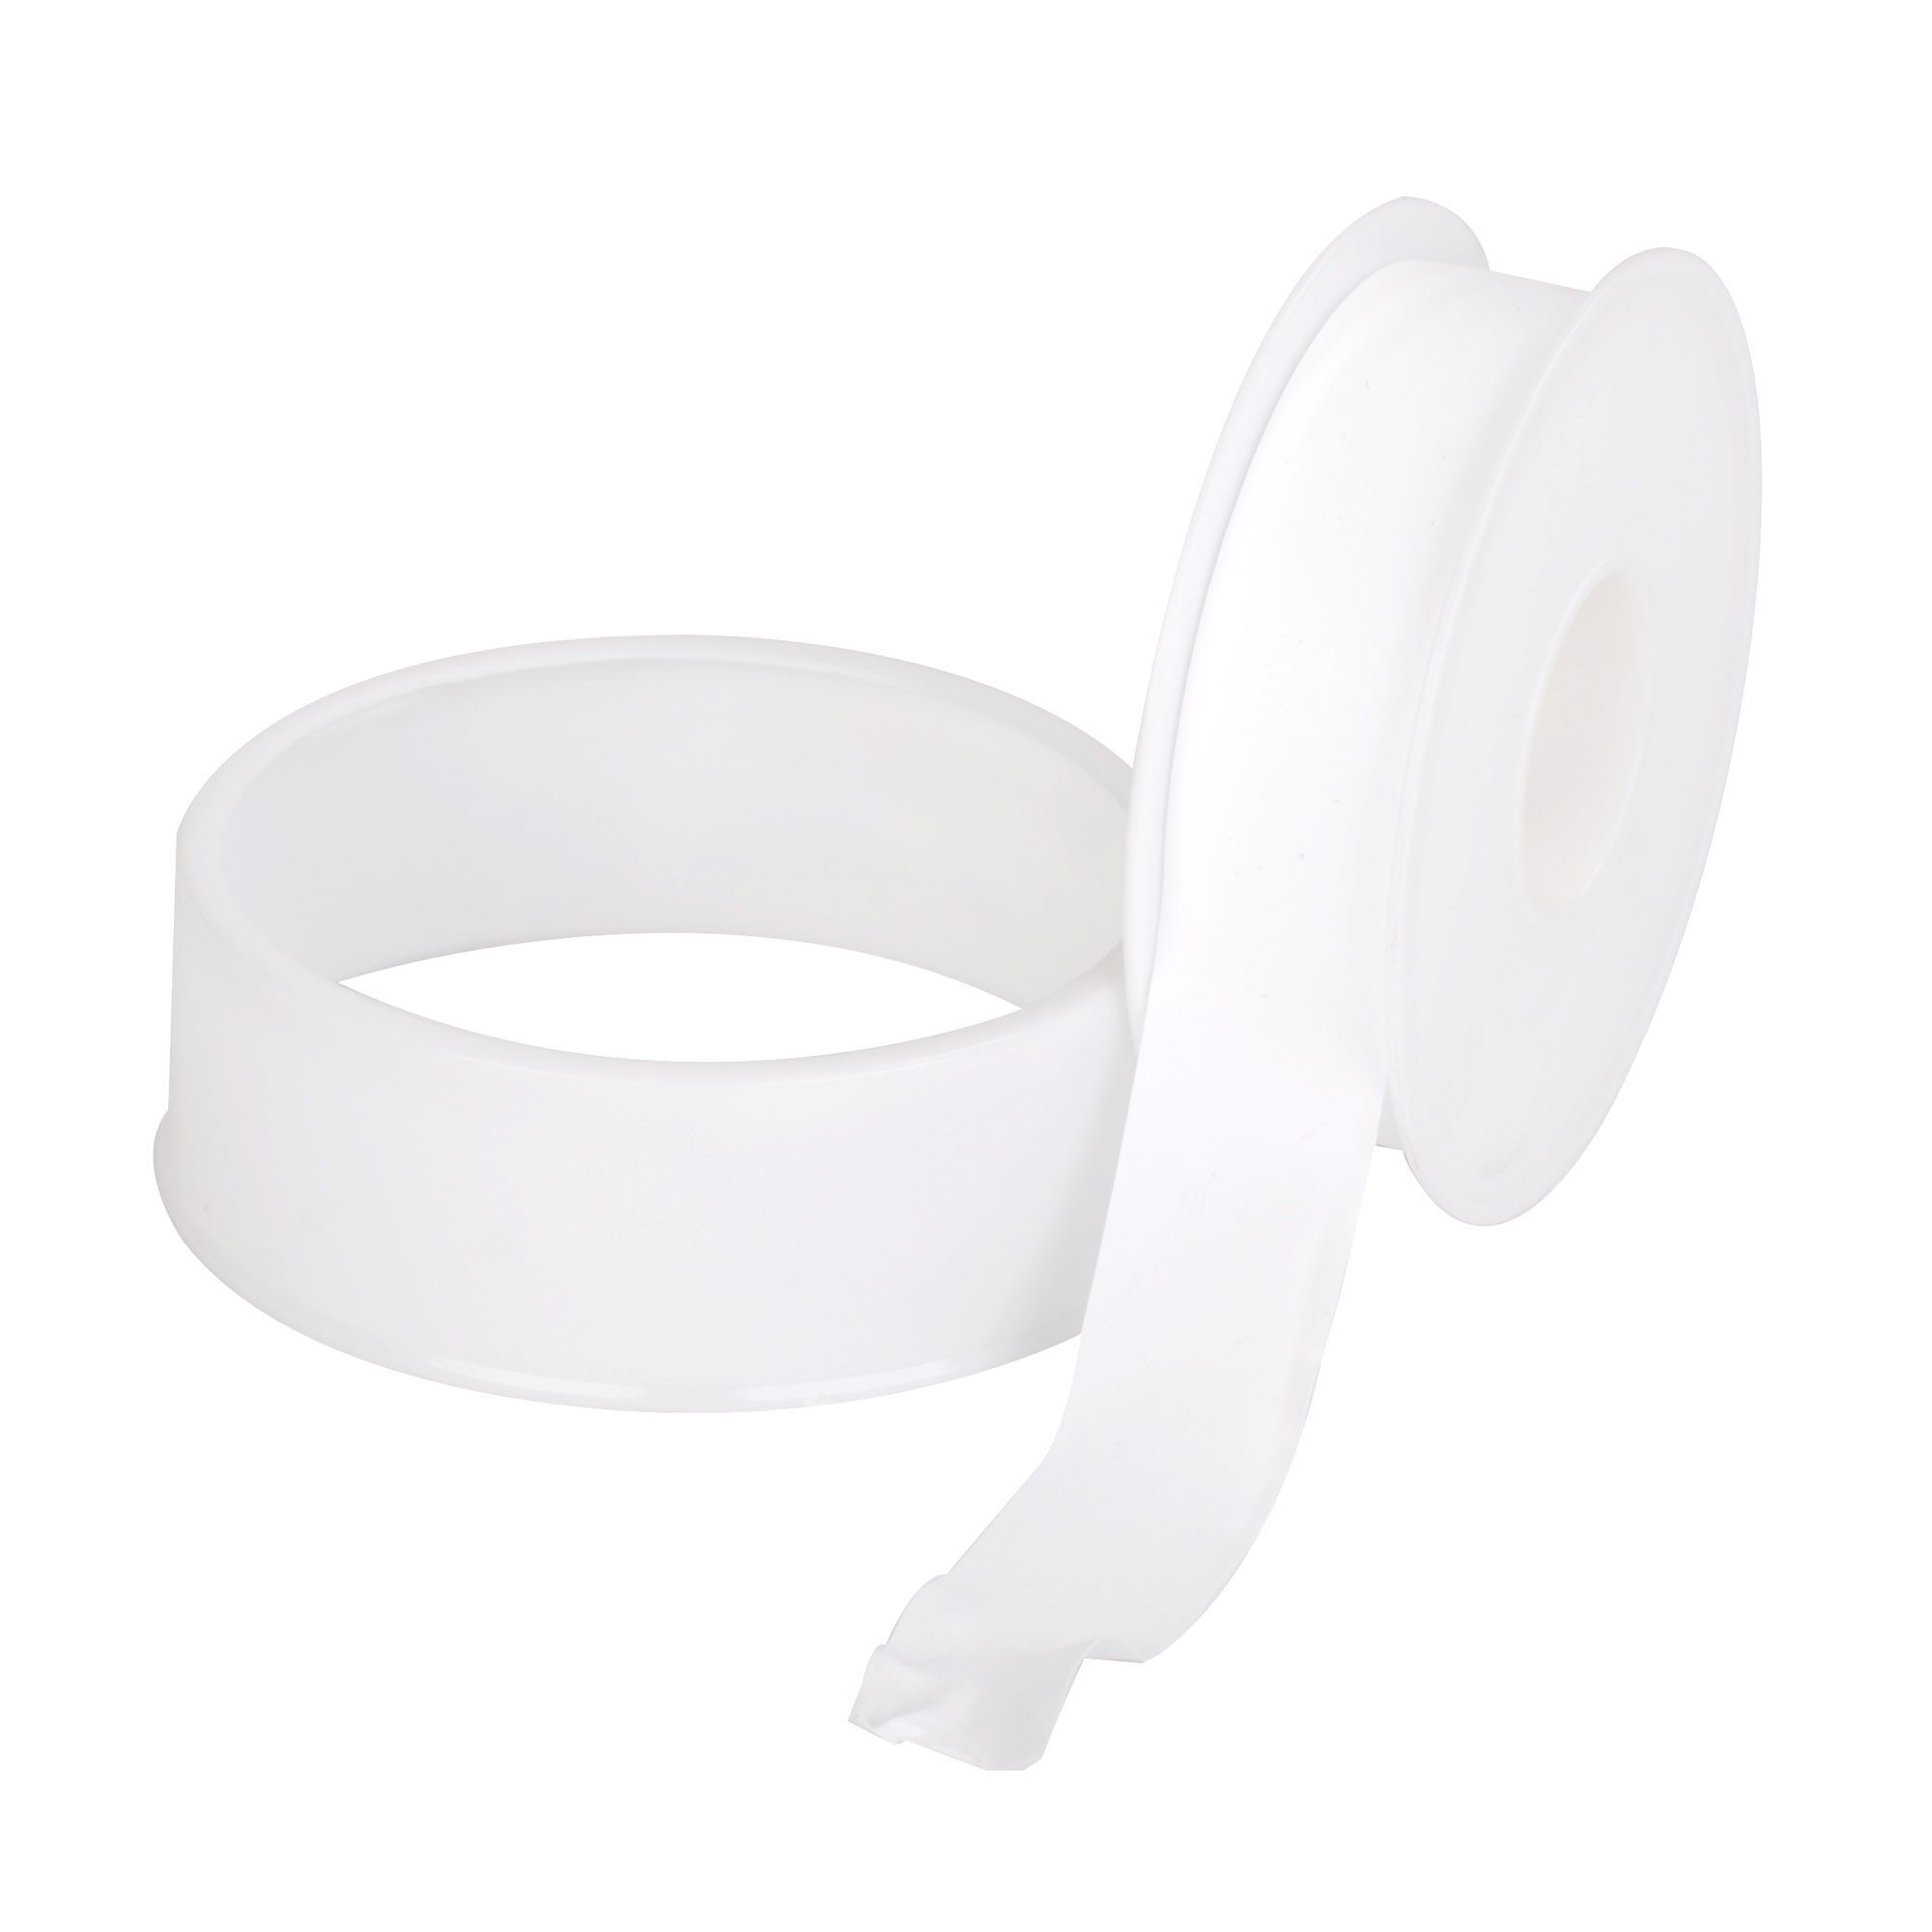 Diall White PTFE Pipe thread sealing tape (L)12m (W)12mm, Pack of 10